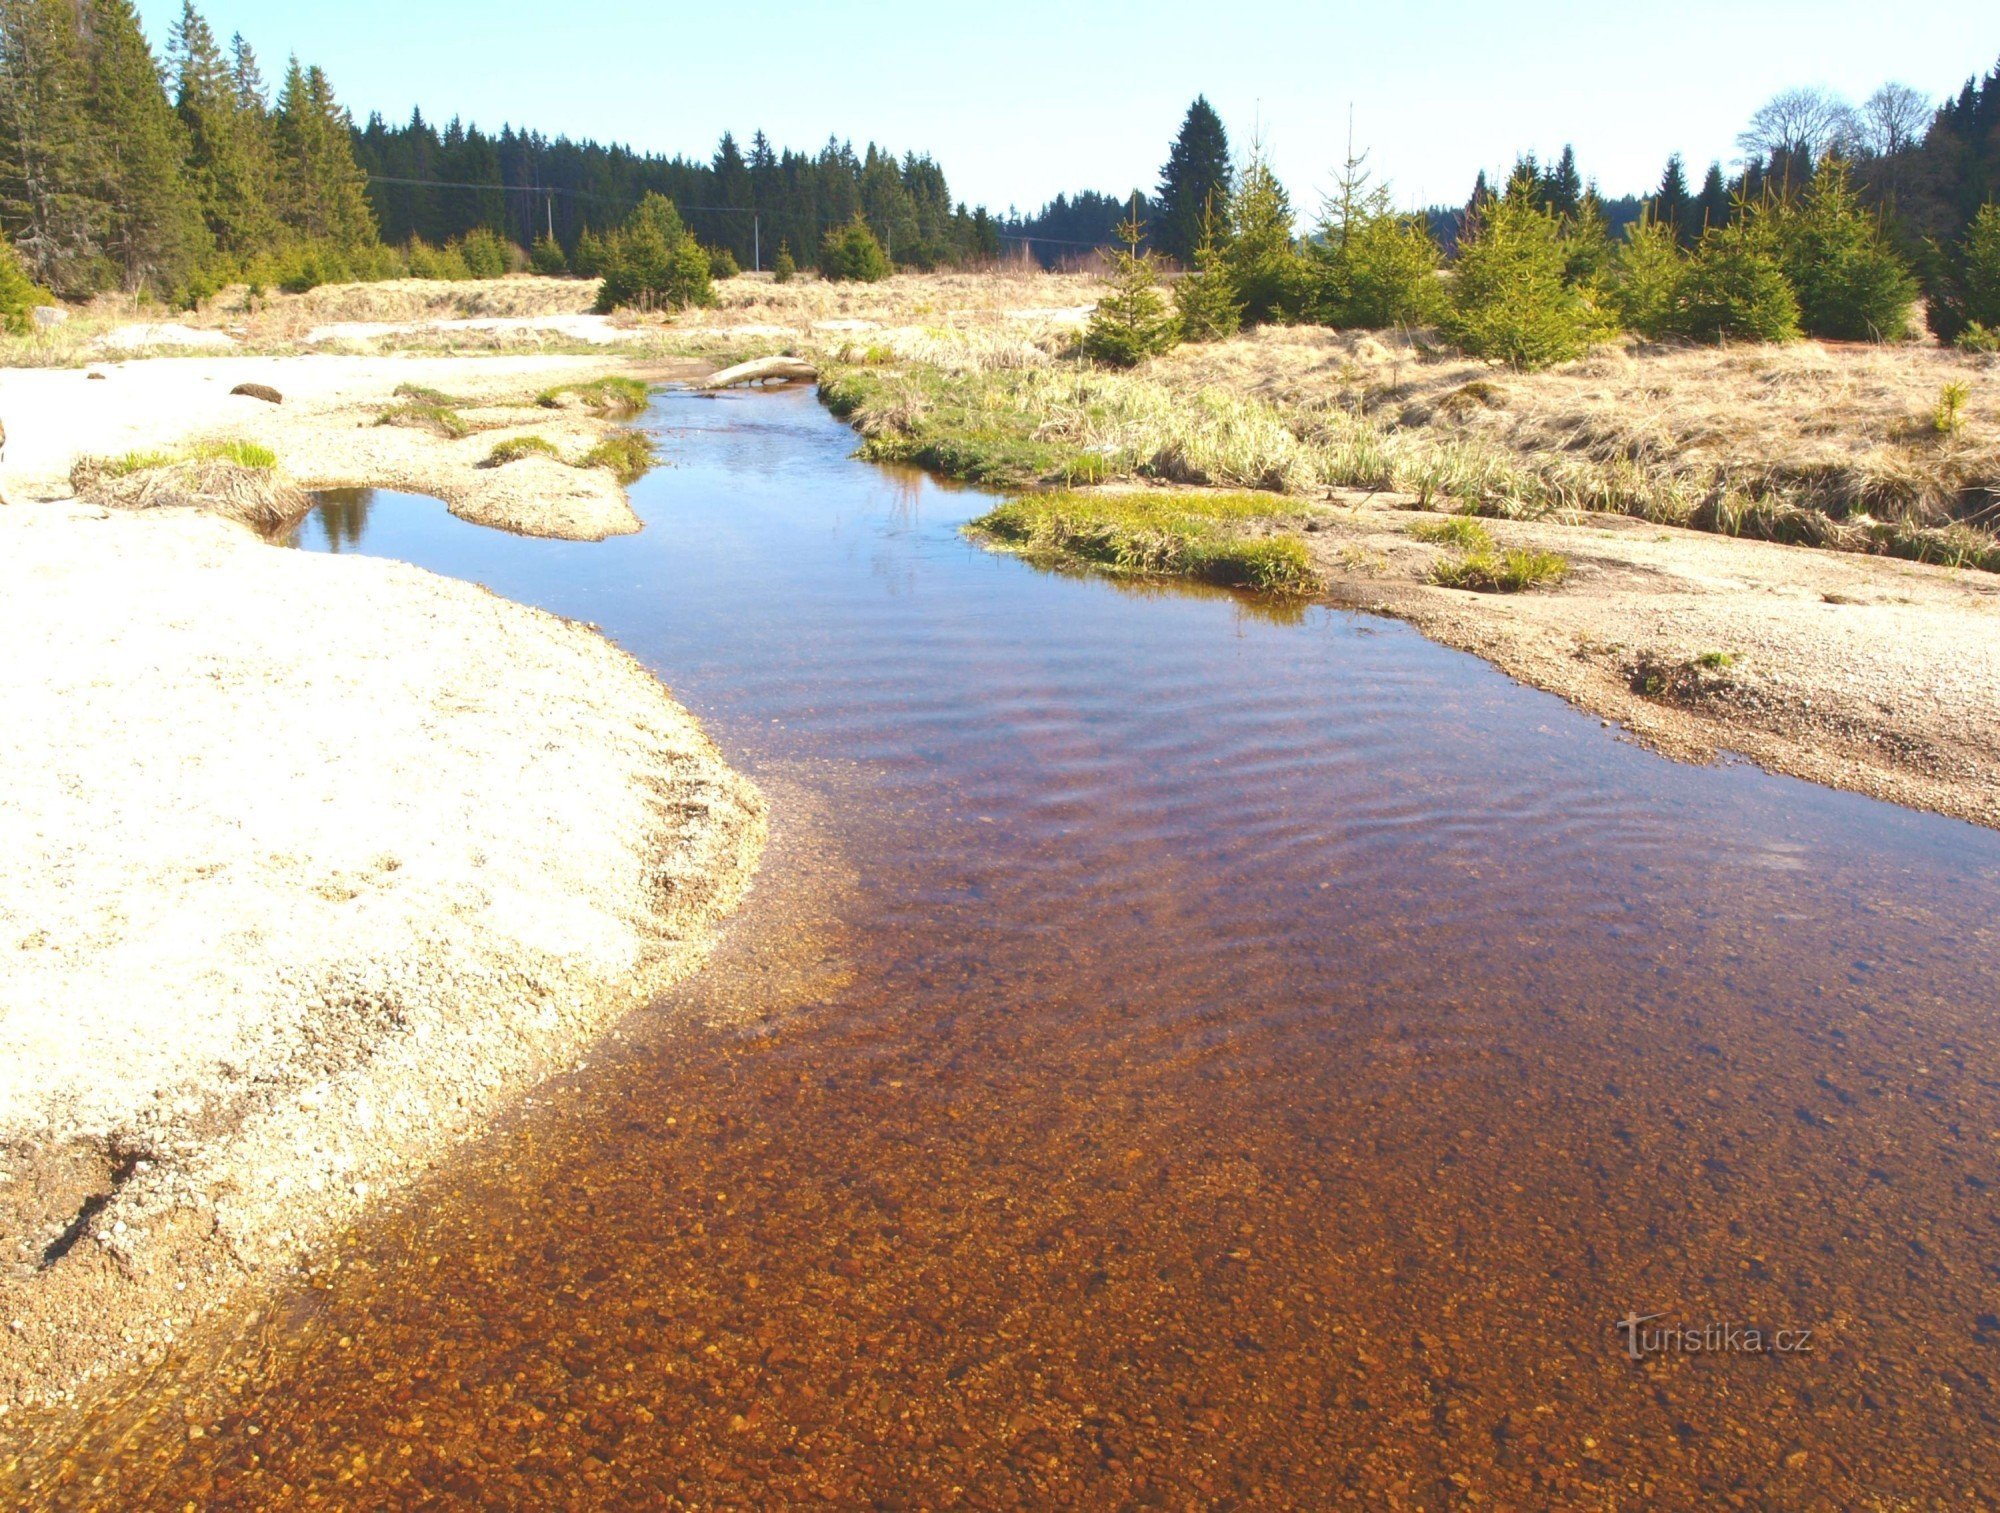 A mountain stream just above the mouth of the reservoir. The water has a bog color